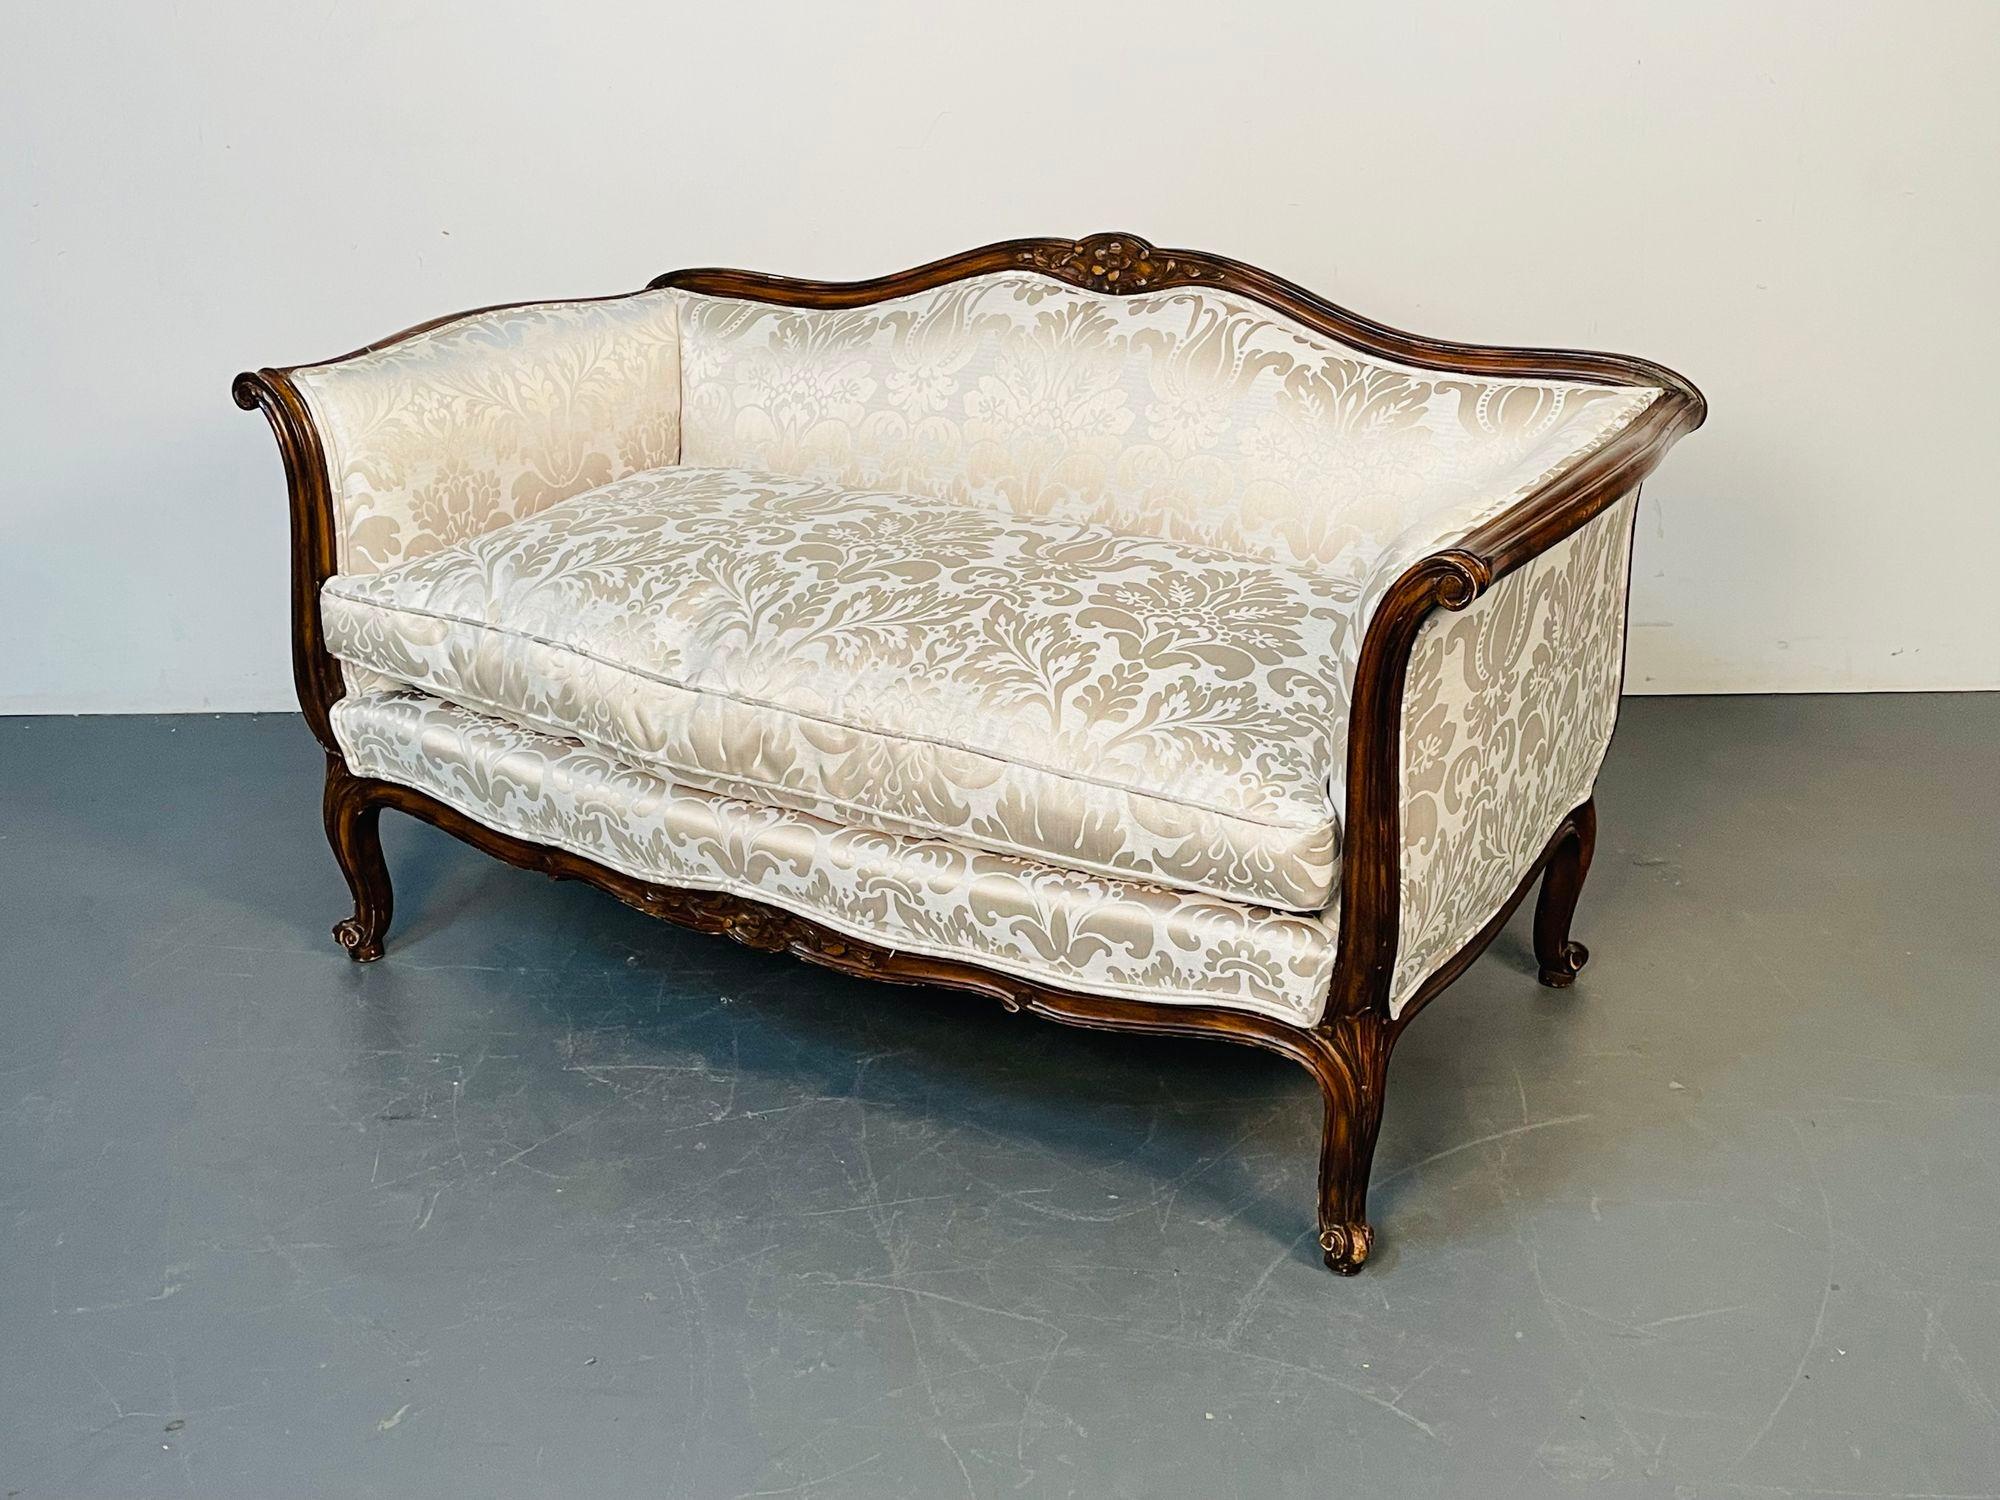 Wood Louis XV Mahogany Carved Settee, Canape / Sofa, Floral Silk Upholstery For Sale